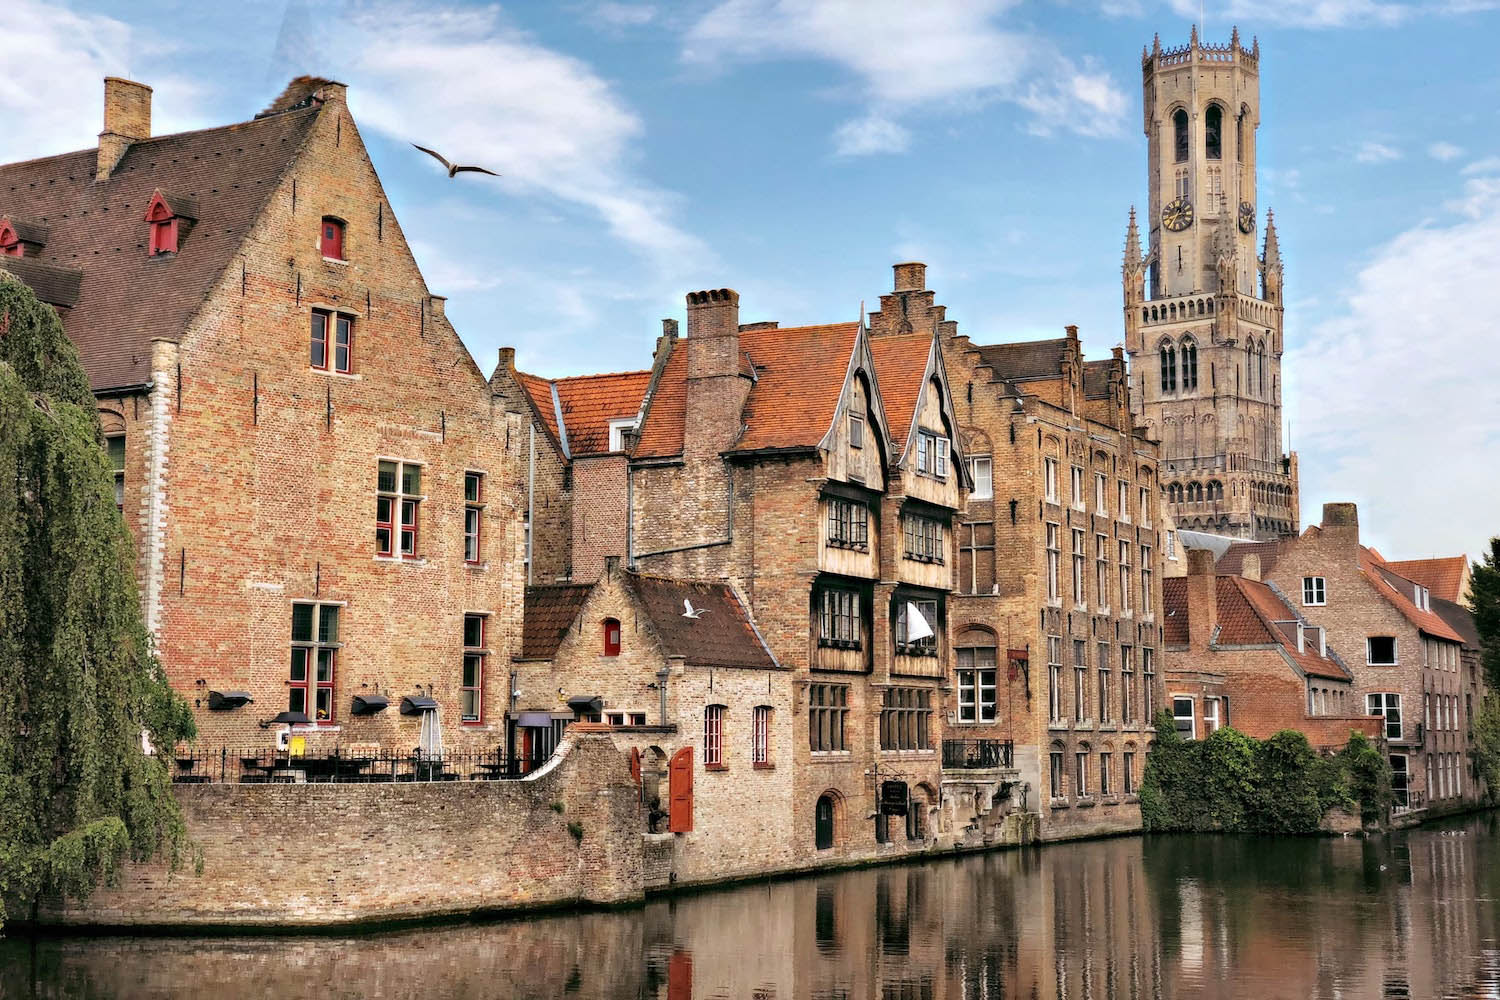 Photo of the city of Bruges with brick houses and the tower